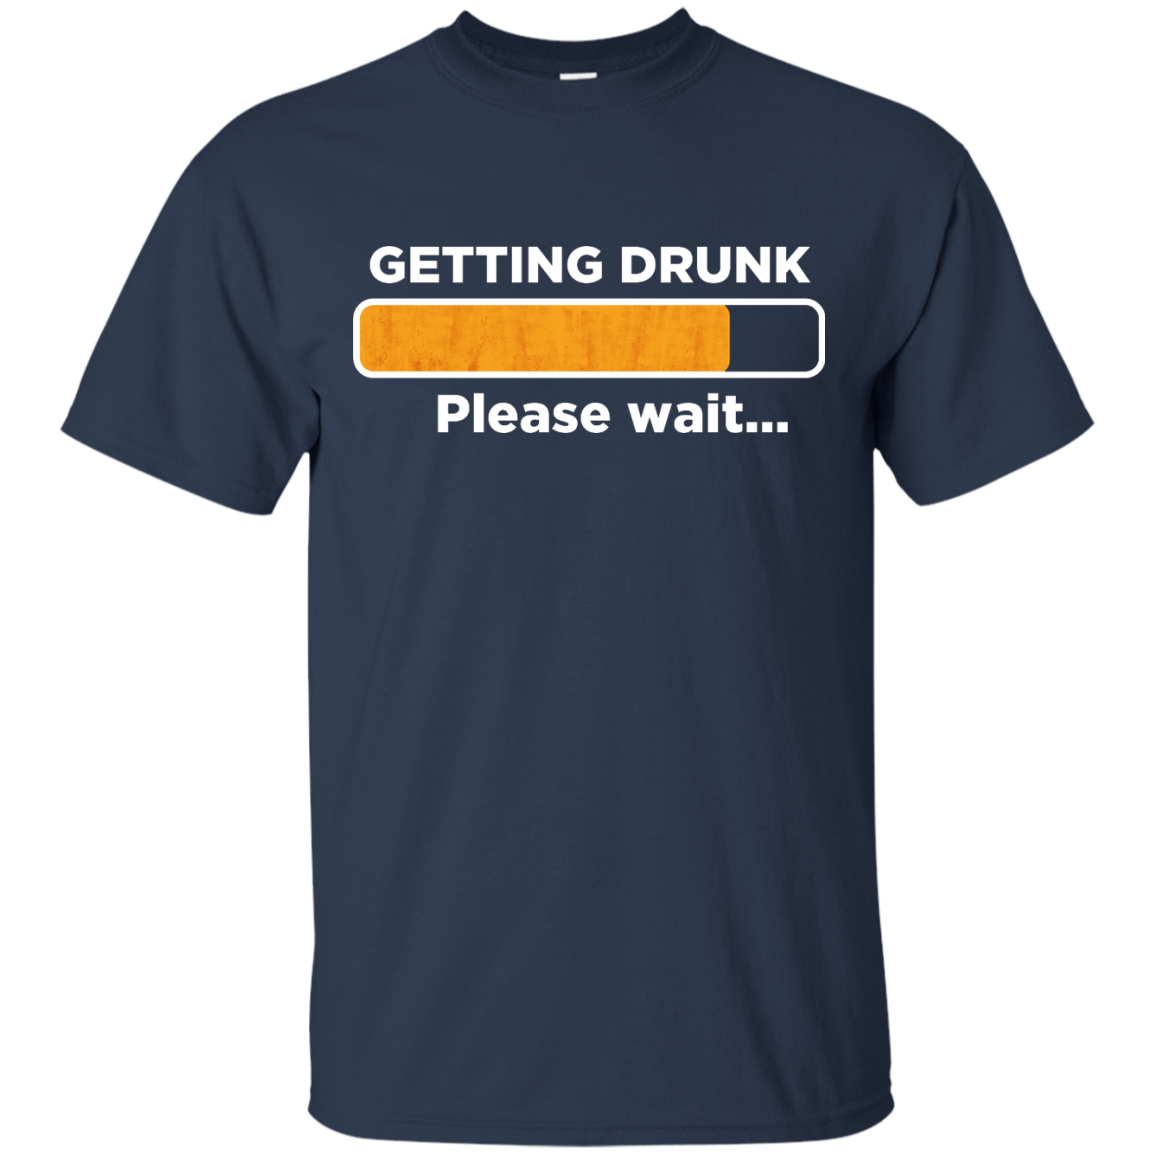 Getting Drunk Please Wait T-Shirt Apparel - The Beer Lodge